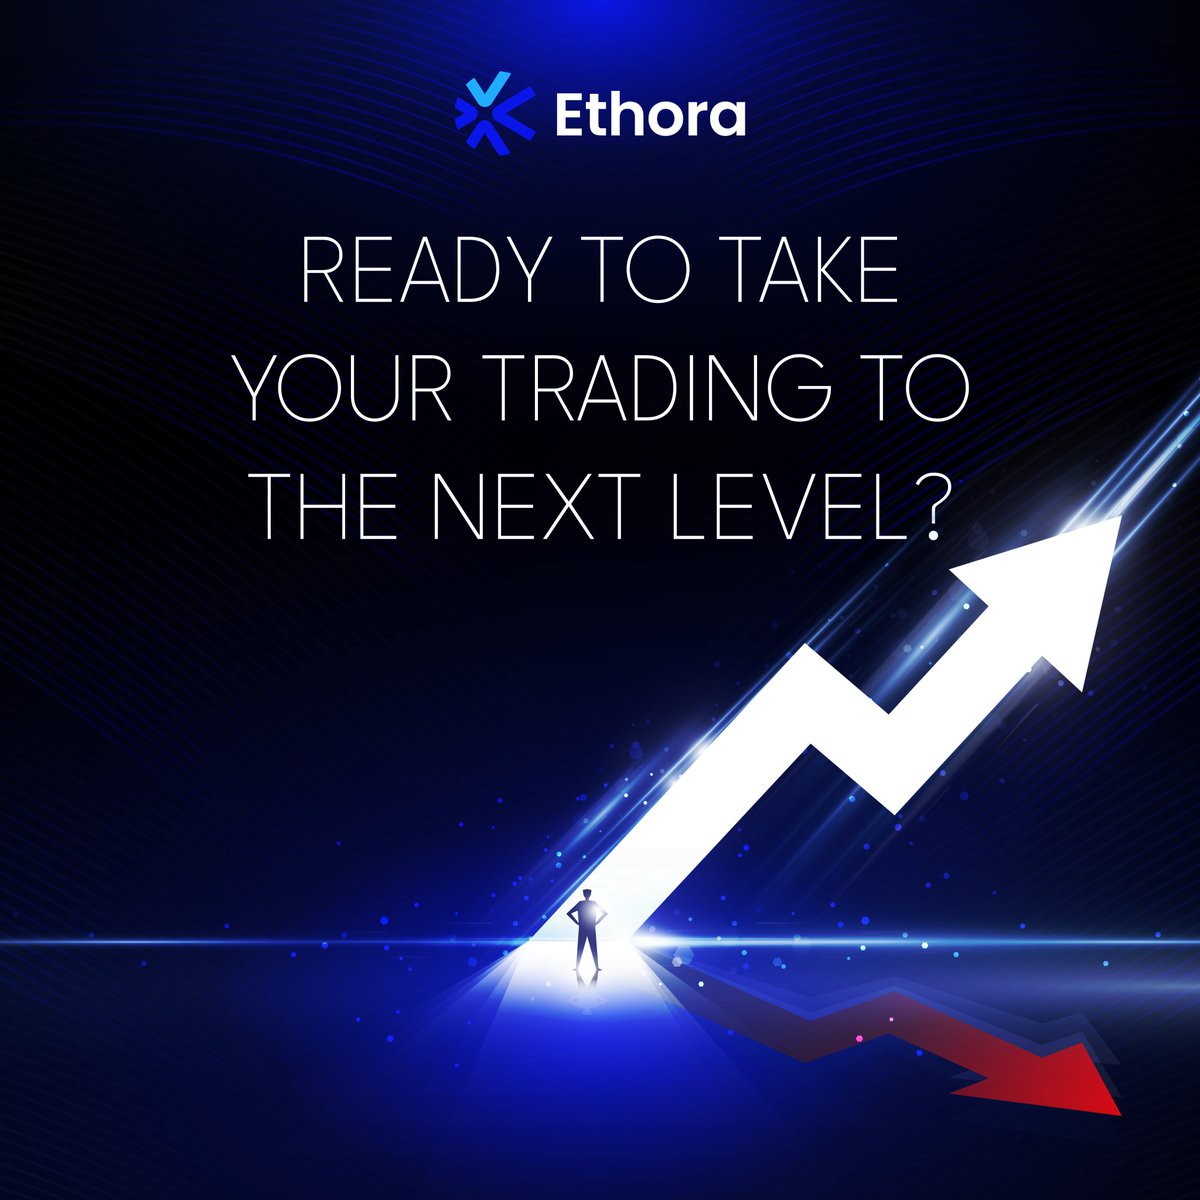 Did you know you can earn up to 90% payouts on Binary Options trades? 
Ethora unlocks the potential for massive gains. Ready to take your trading to the next level?

#Option #base